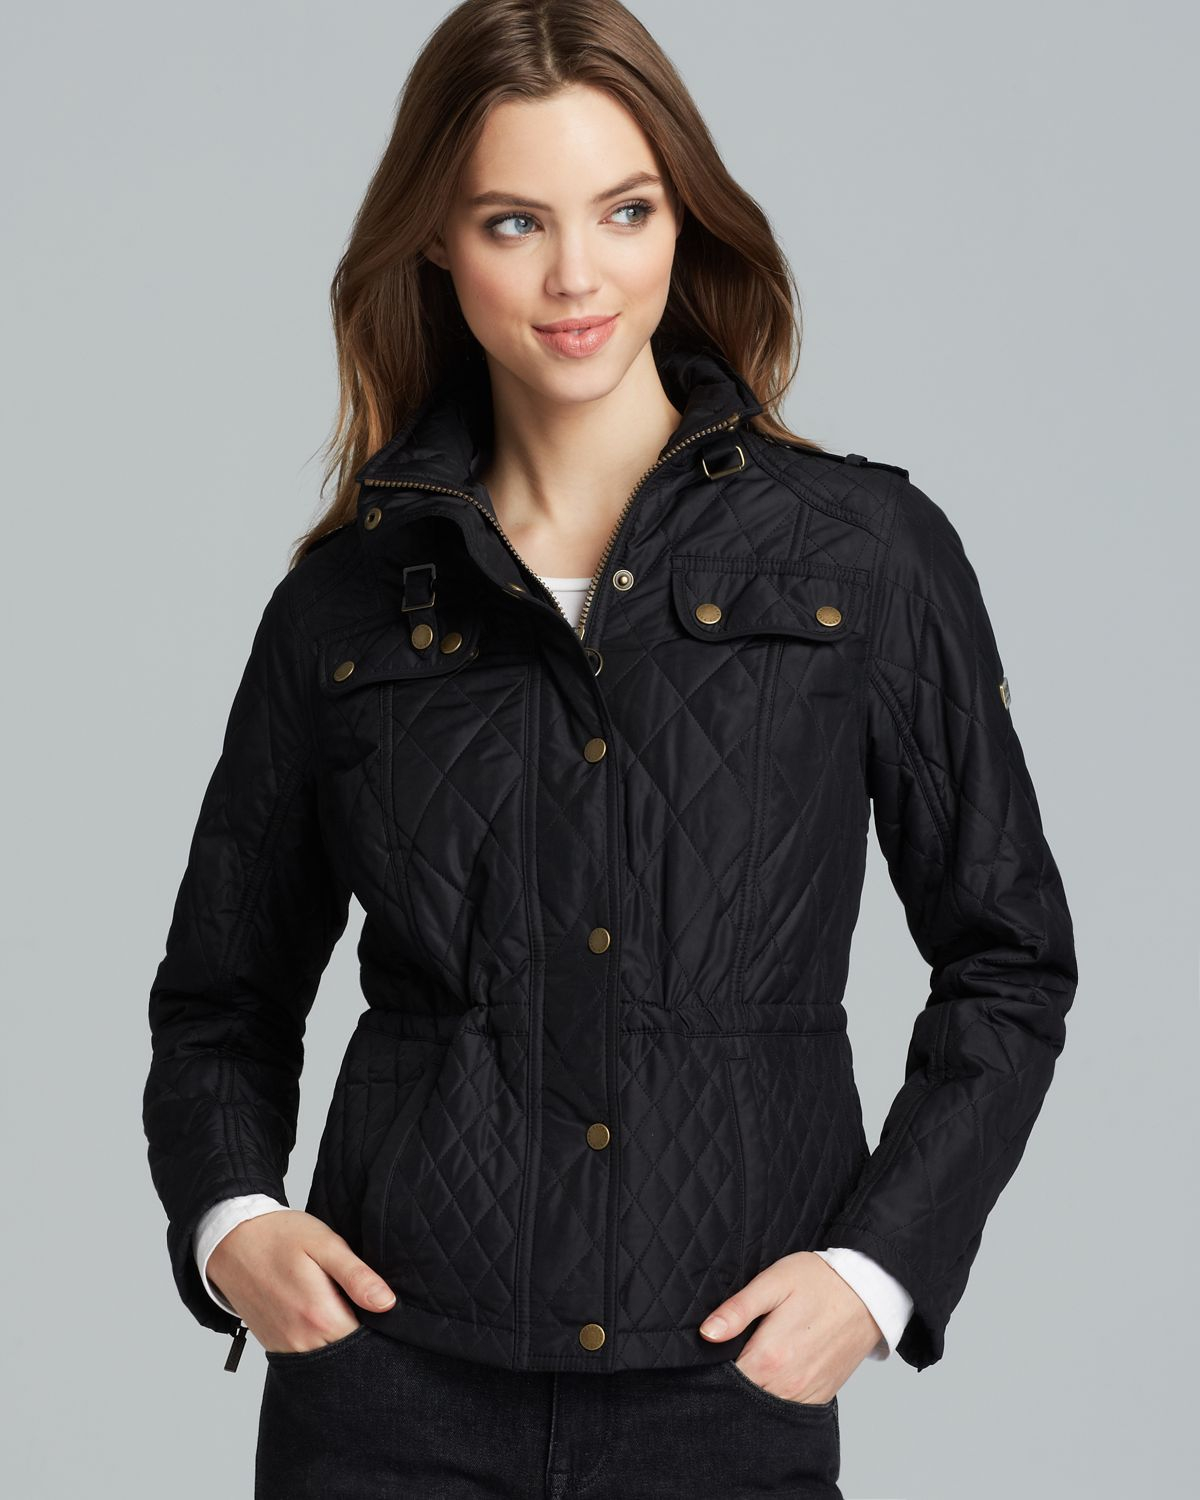 Black Friday|barbour coil quilted jacket hood cheap